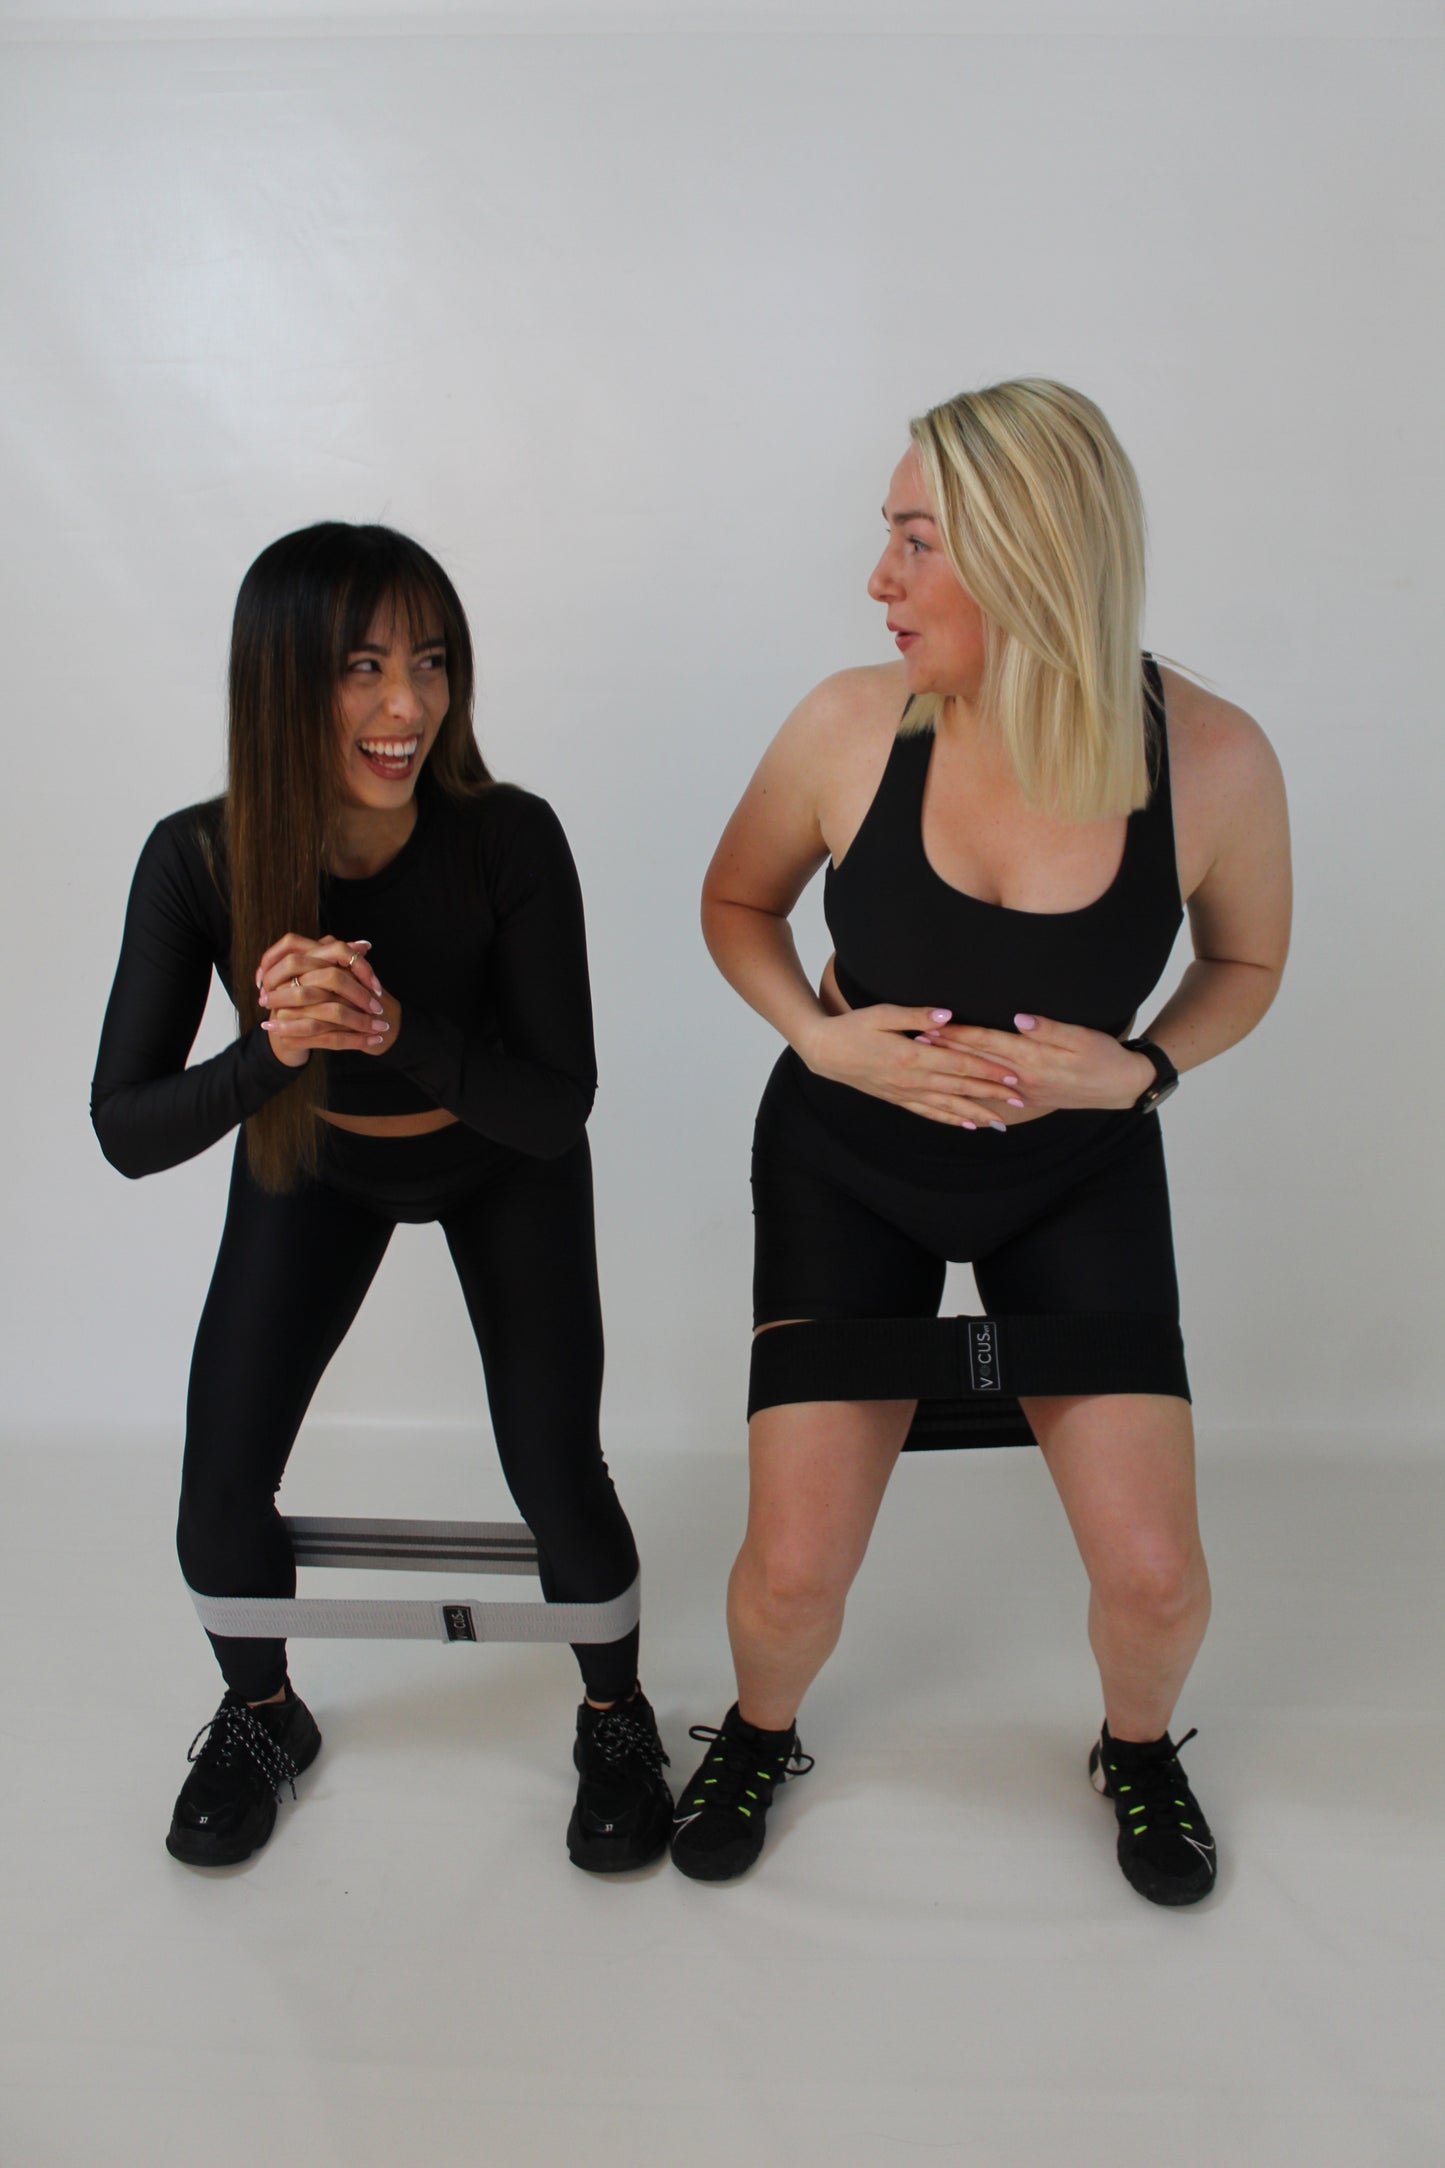 Two girls doing a squat with resistance bands around their thighs. They are laughing and smiling. Both wearing Vocus Vit activewear. Vocus vit is a sustainable women's activewear brand that uses recycled materials and ethical manufacturing. Based in Northern Ireland. Shipping worldwide.